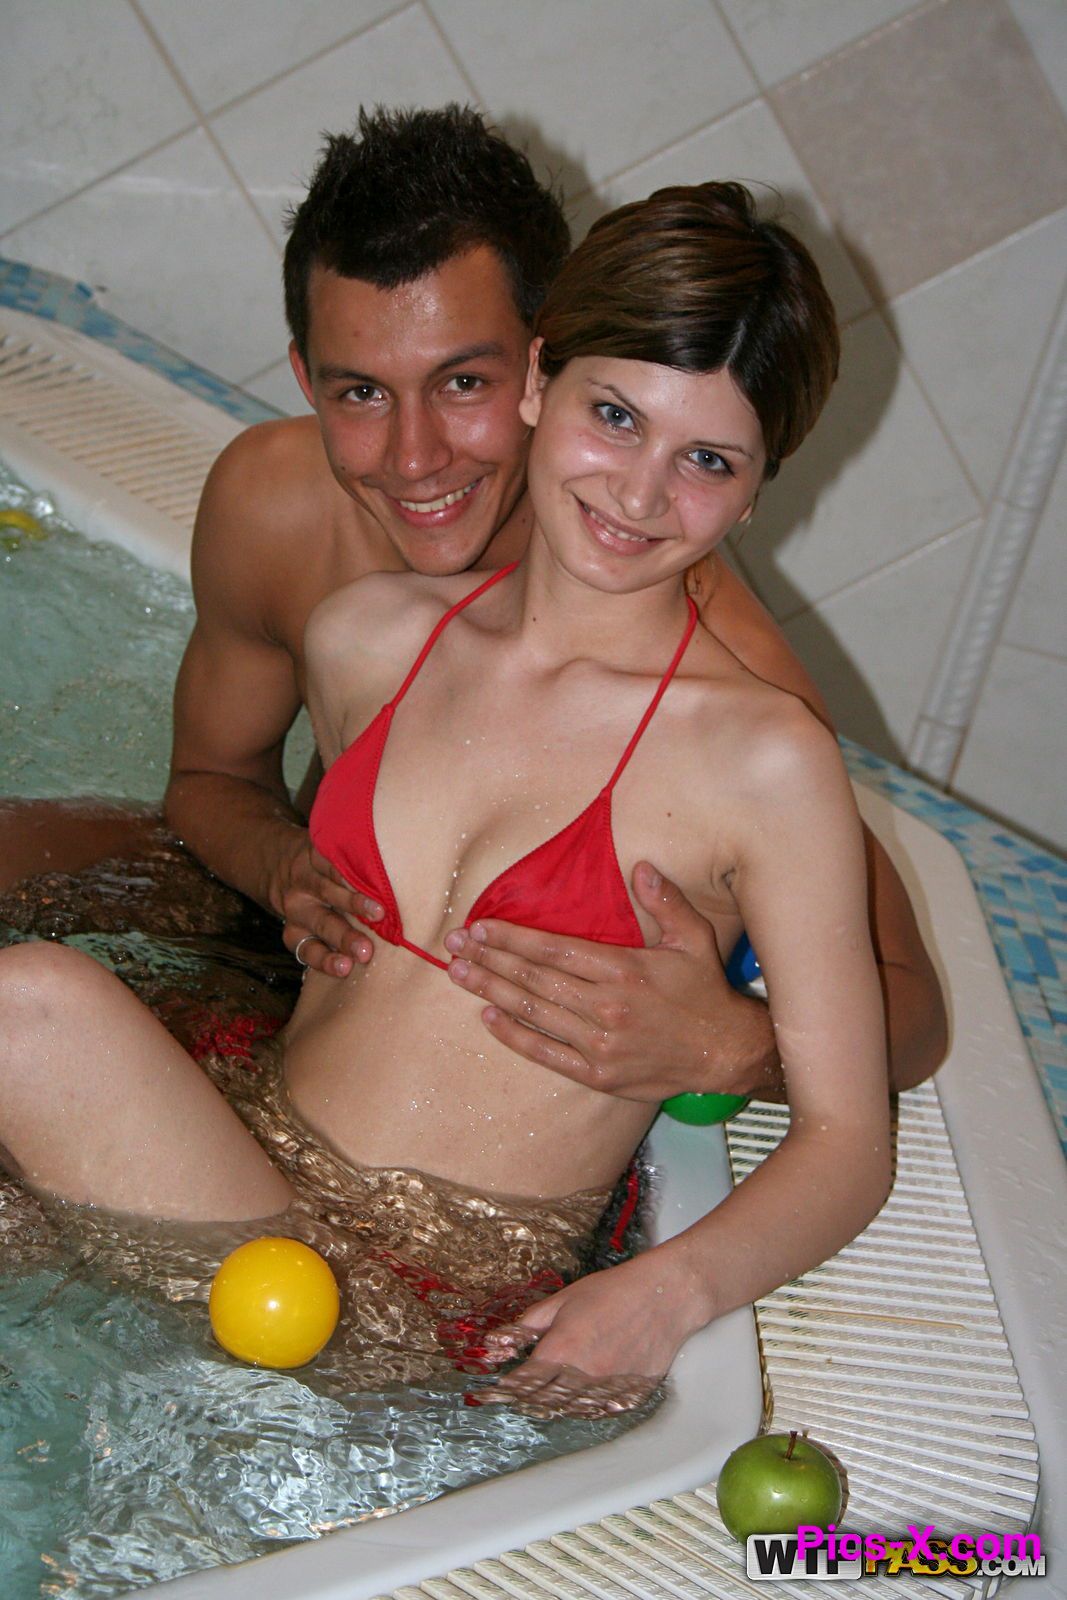 Naked girls party in a sauna, part 8 - College Fuck Parties - Image 36